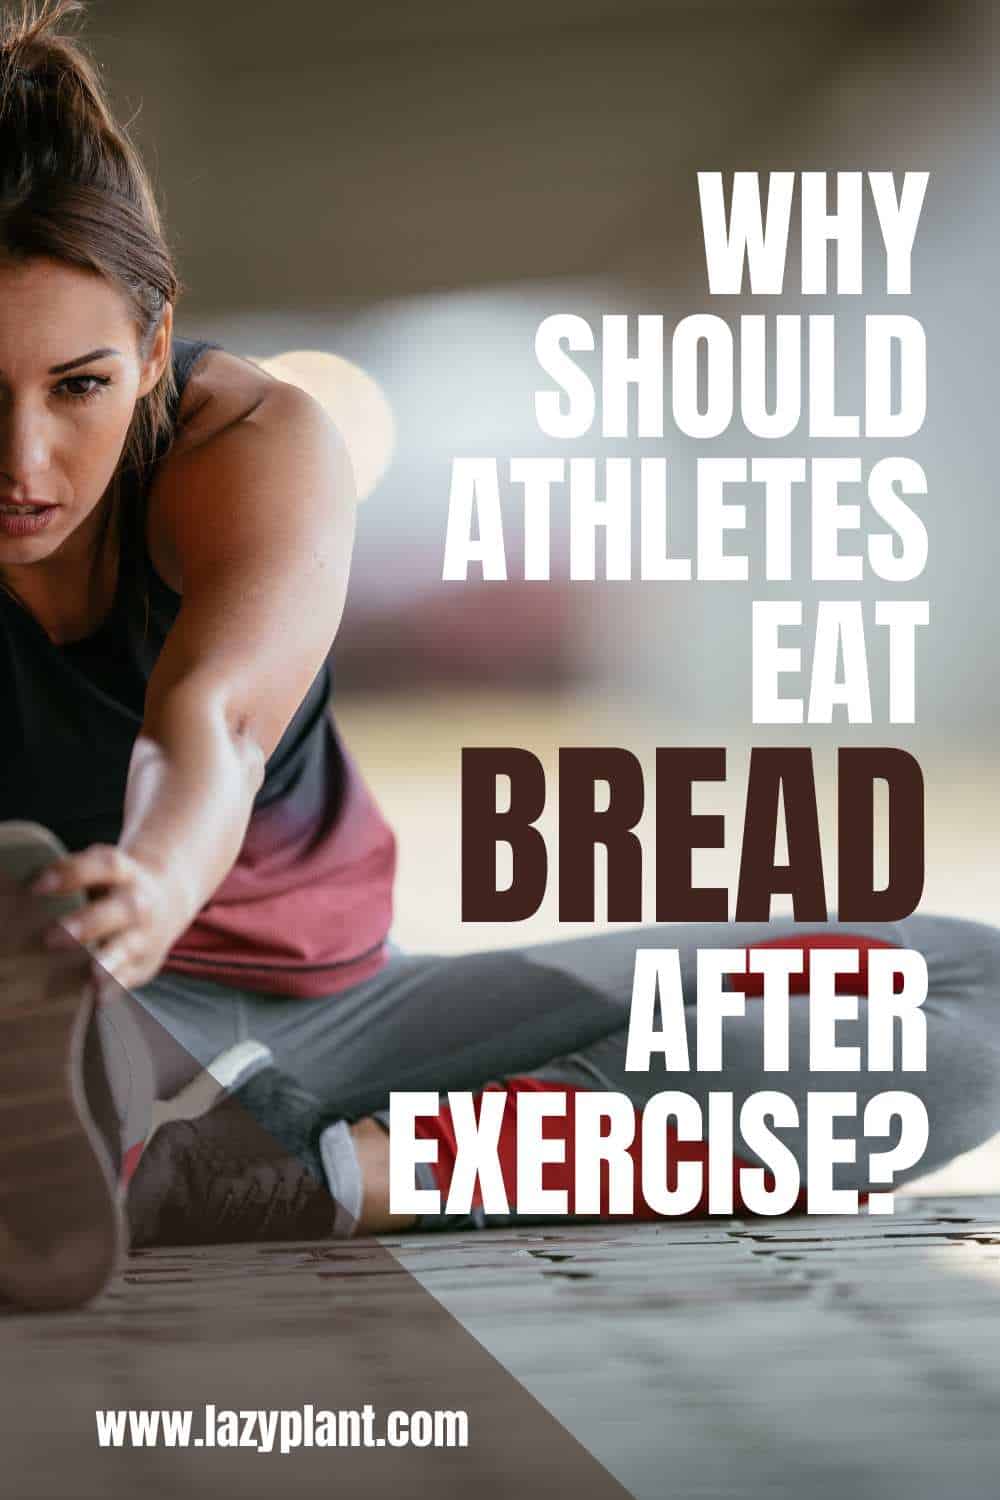 Eating white bread after exhausting exercise has many benefits for athletic performance!